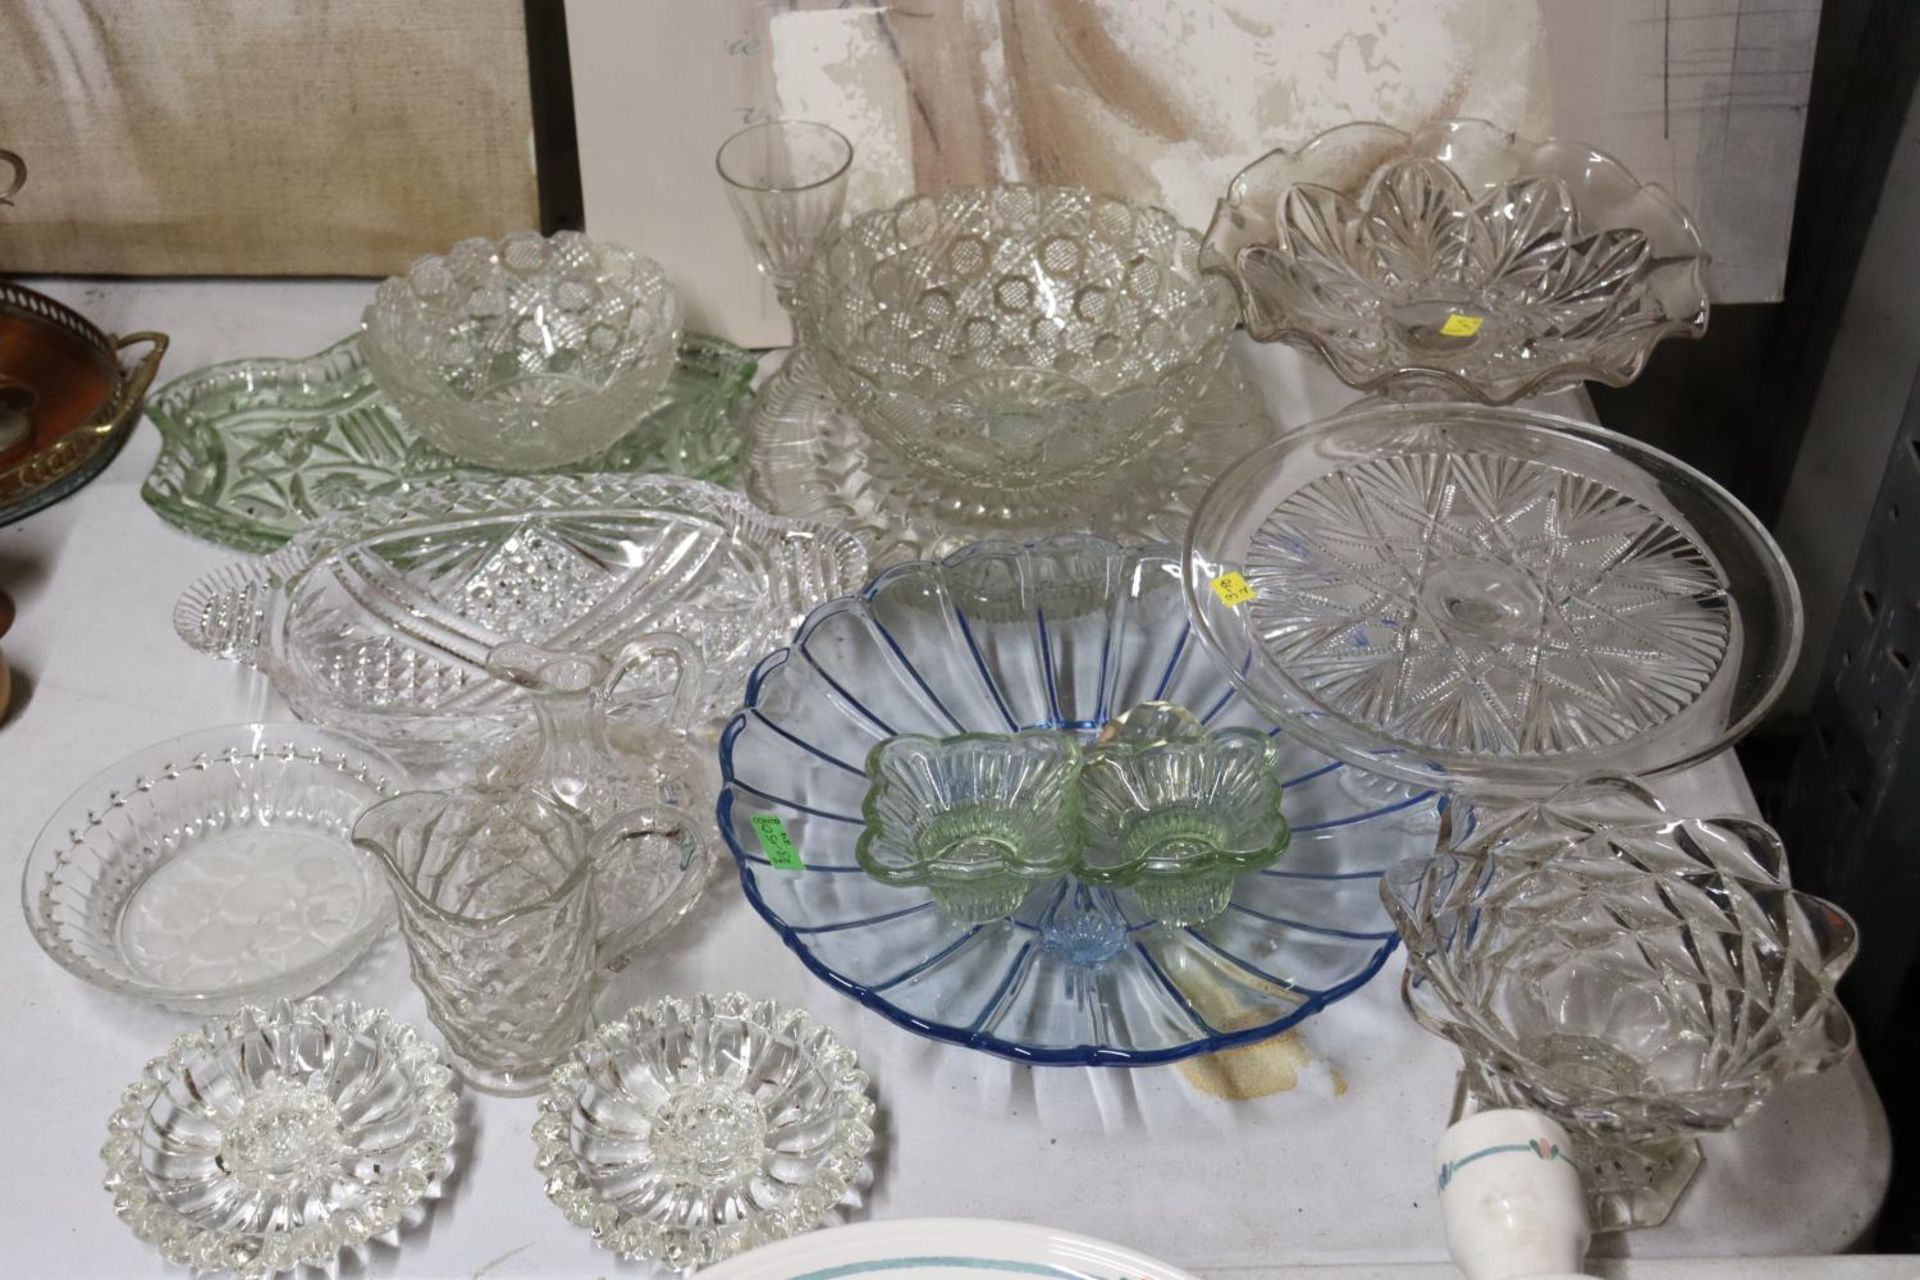 A LARGE QUANTITY OF GLASSWARE TO INCLUDE BOWLS, CAKE STANDS, JUGS, ETC - Image 6 of 6